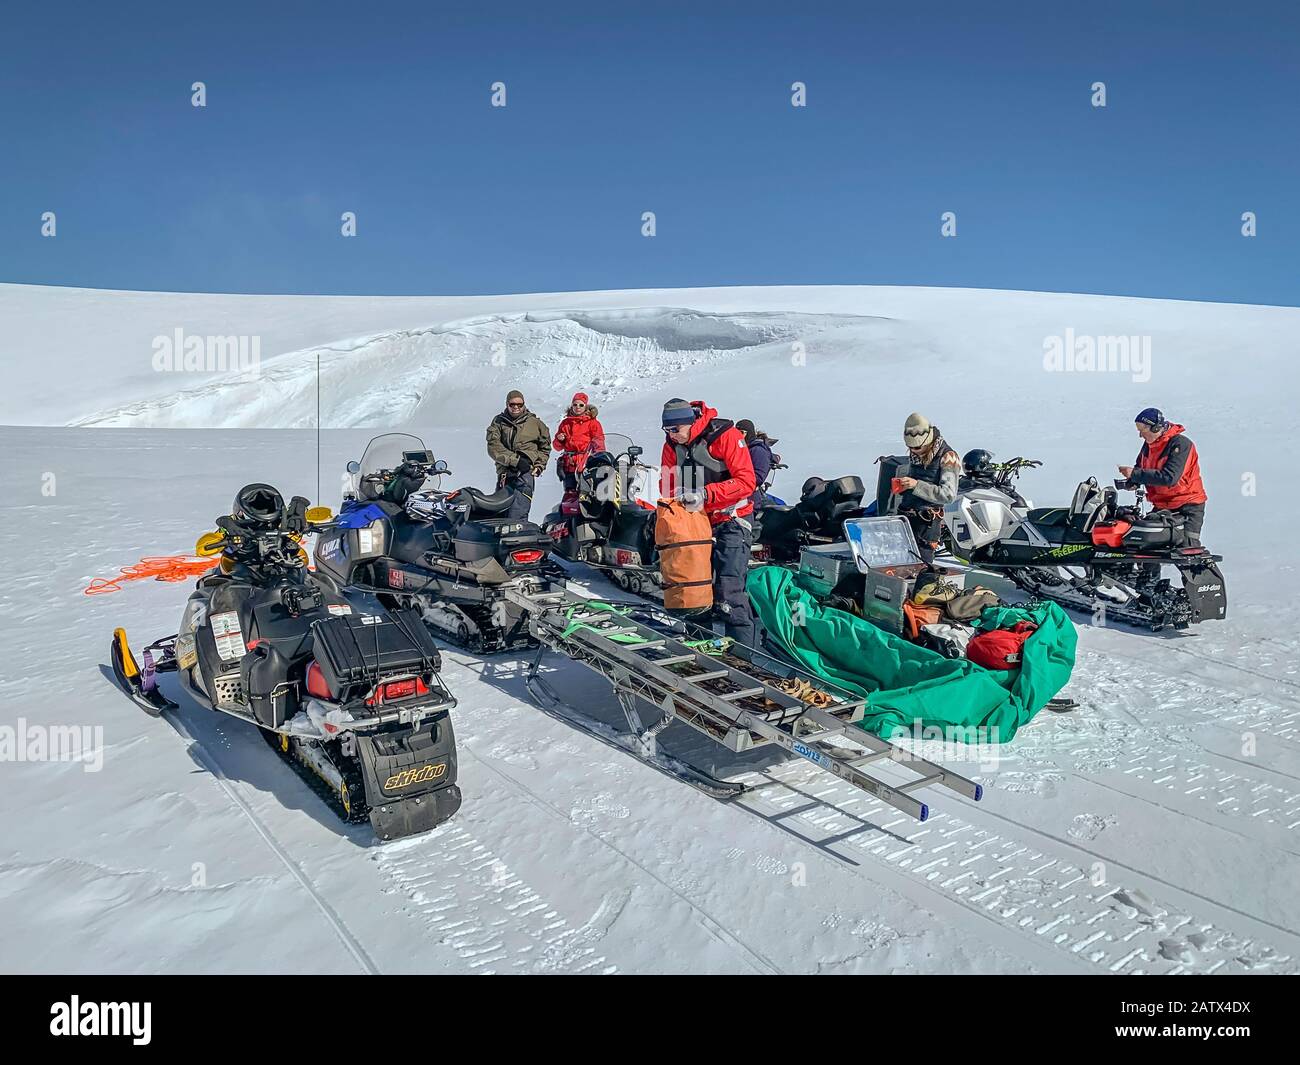 Scientists with snowmobiles on a glacial trip to take samples and measurements, Vatnajokull Ice Cap, Vatnajokull National Park, Iceland. Stock Photo